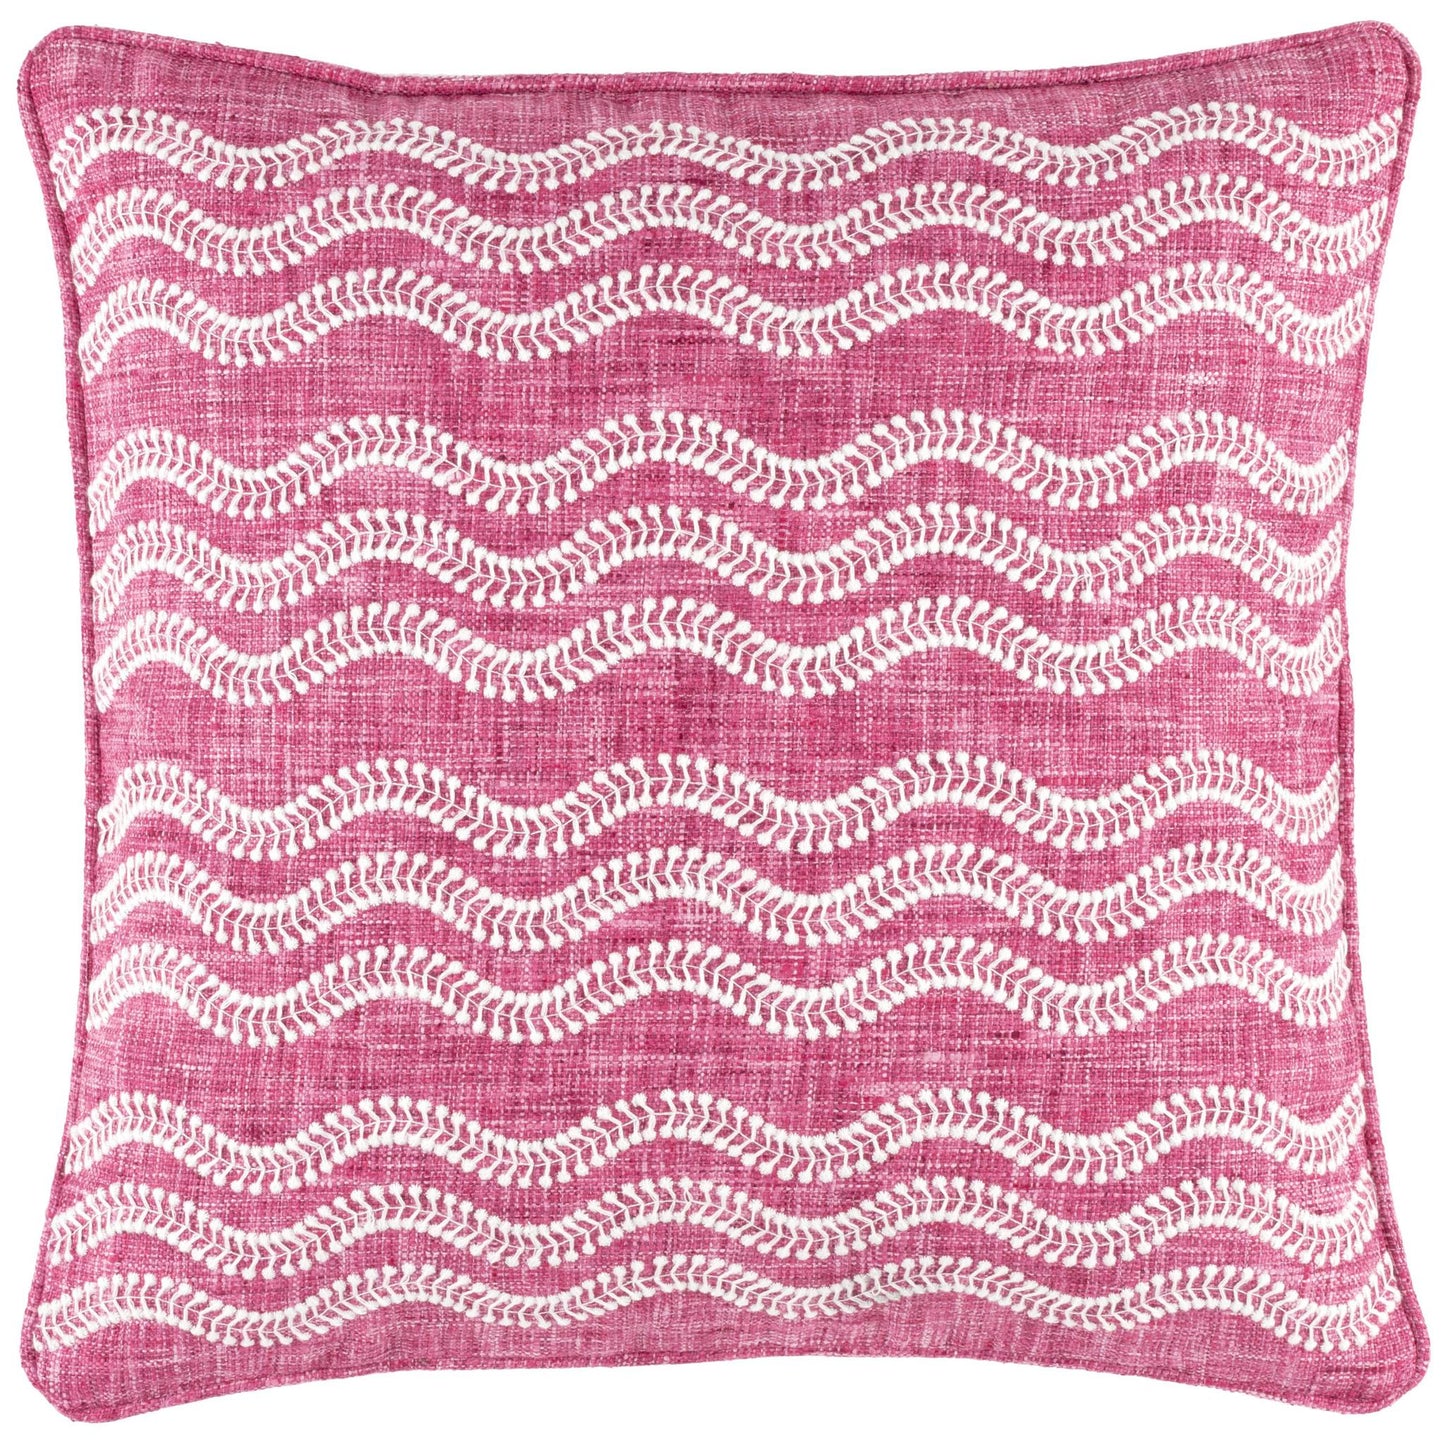 Pillow - "Scout" Embroidered Fuchsia - Indoor/Outdoor - 20"